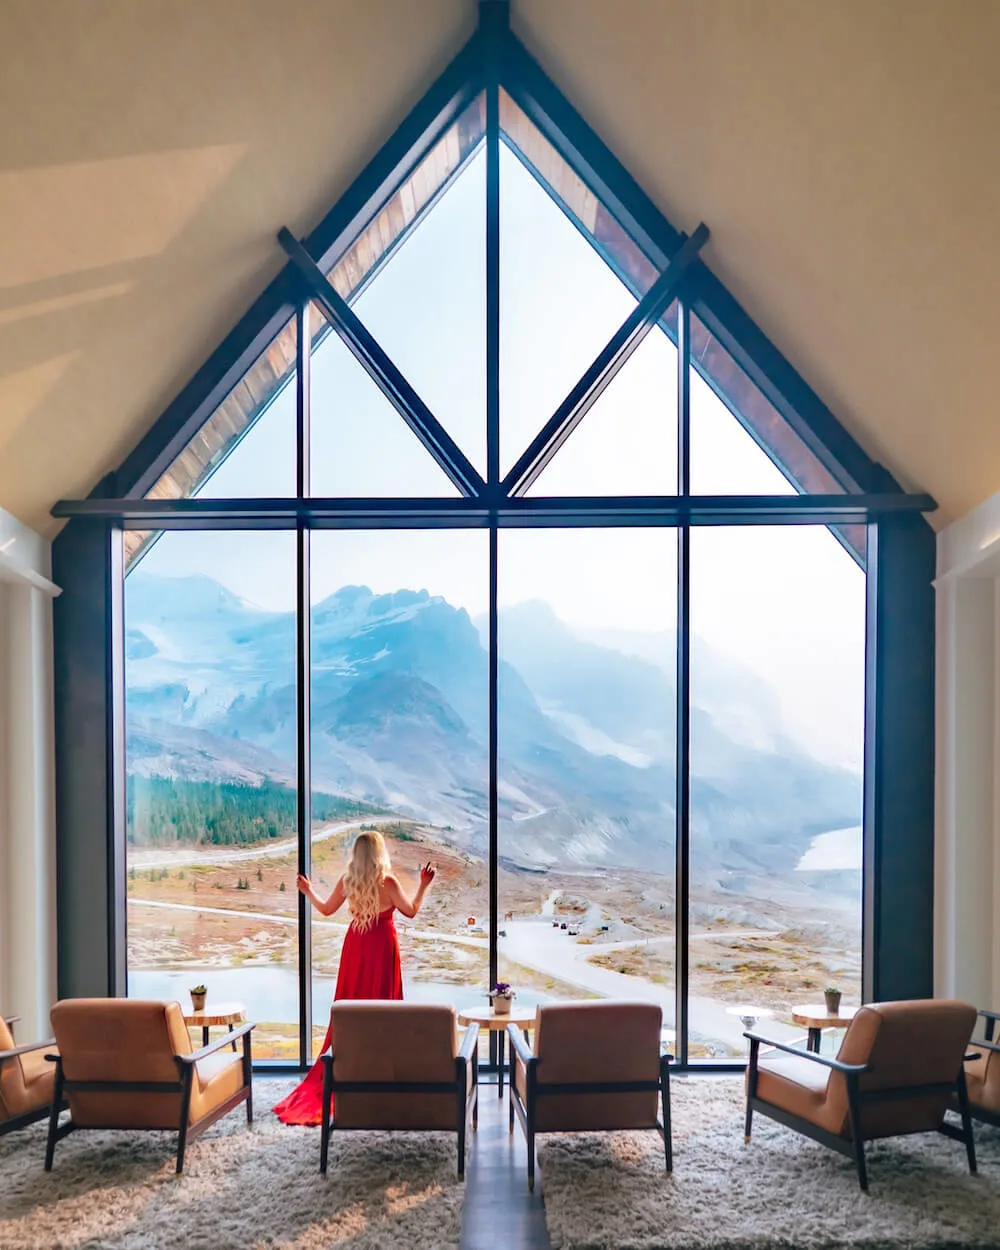 Planning a trip to Jasper National Park soon? Here's a local's guide to some of the best things to do in Jasper. From hikes and trails to adventure sports, family friendly excursions, dining experiences and more. You won't want to miss this guide of the best things to do and places to see in Jasper. Pictured here: Glacier View Lodge